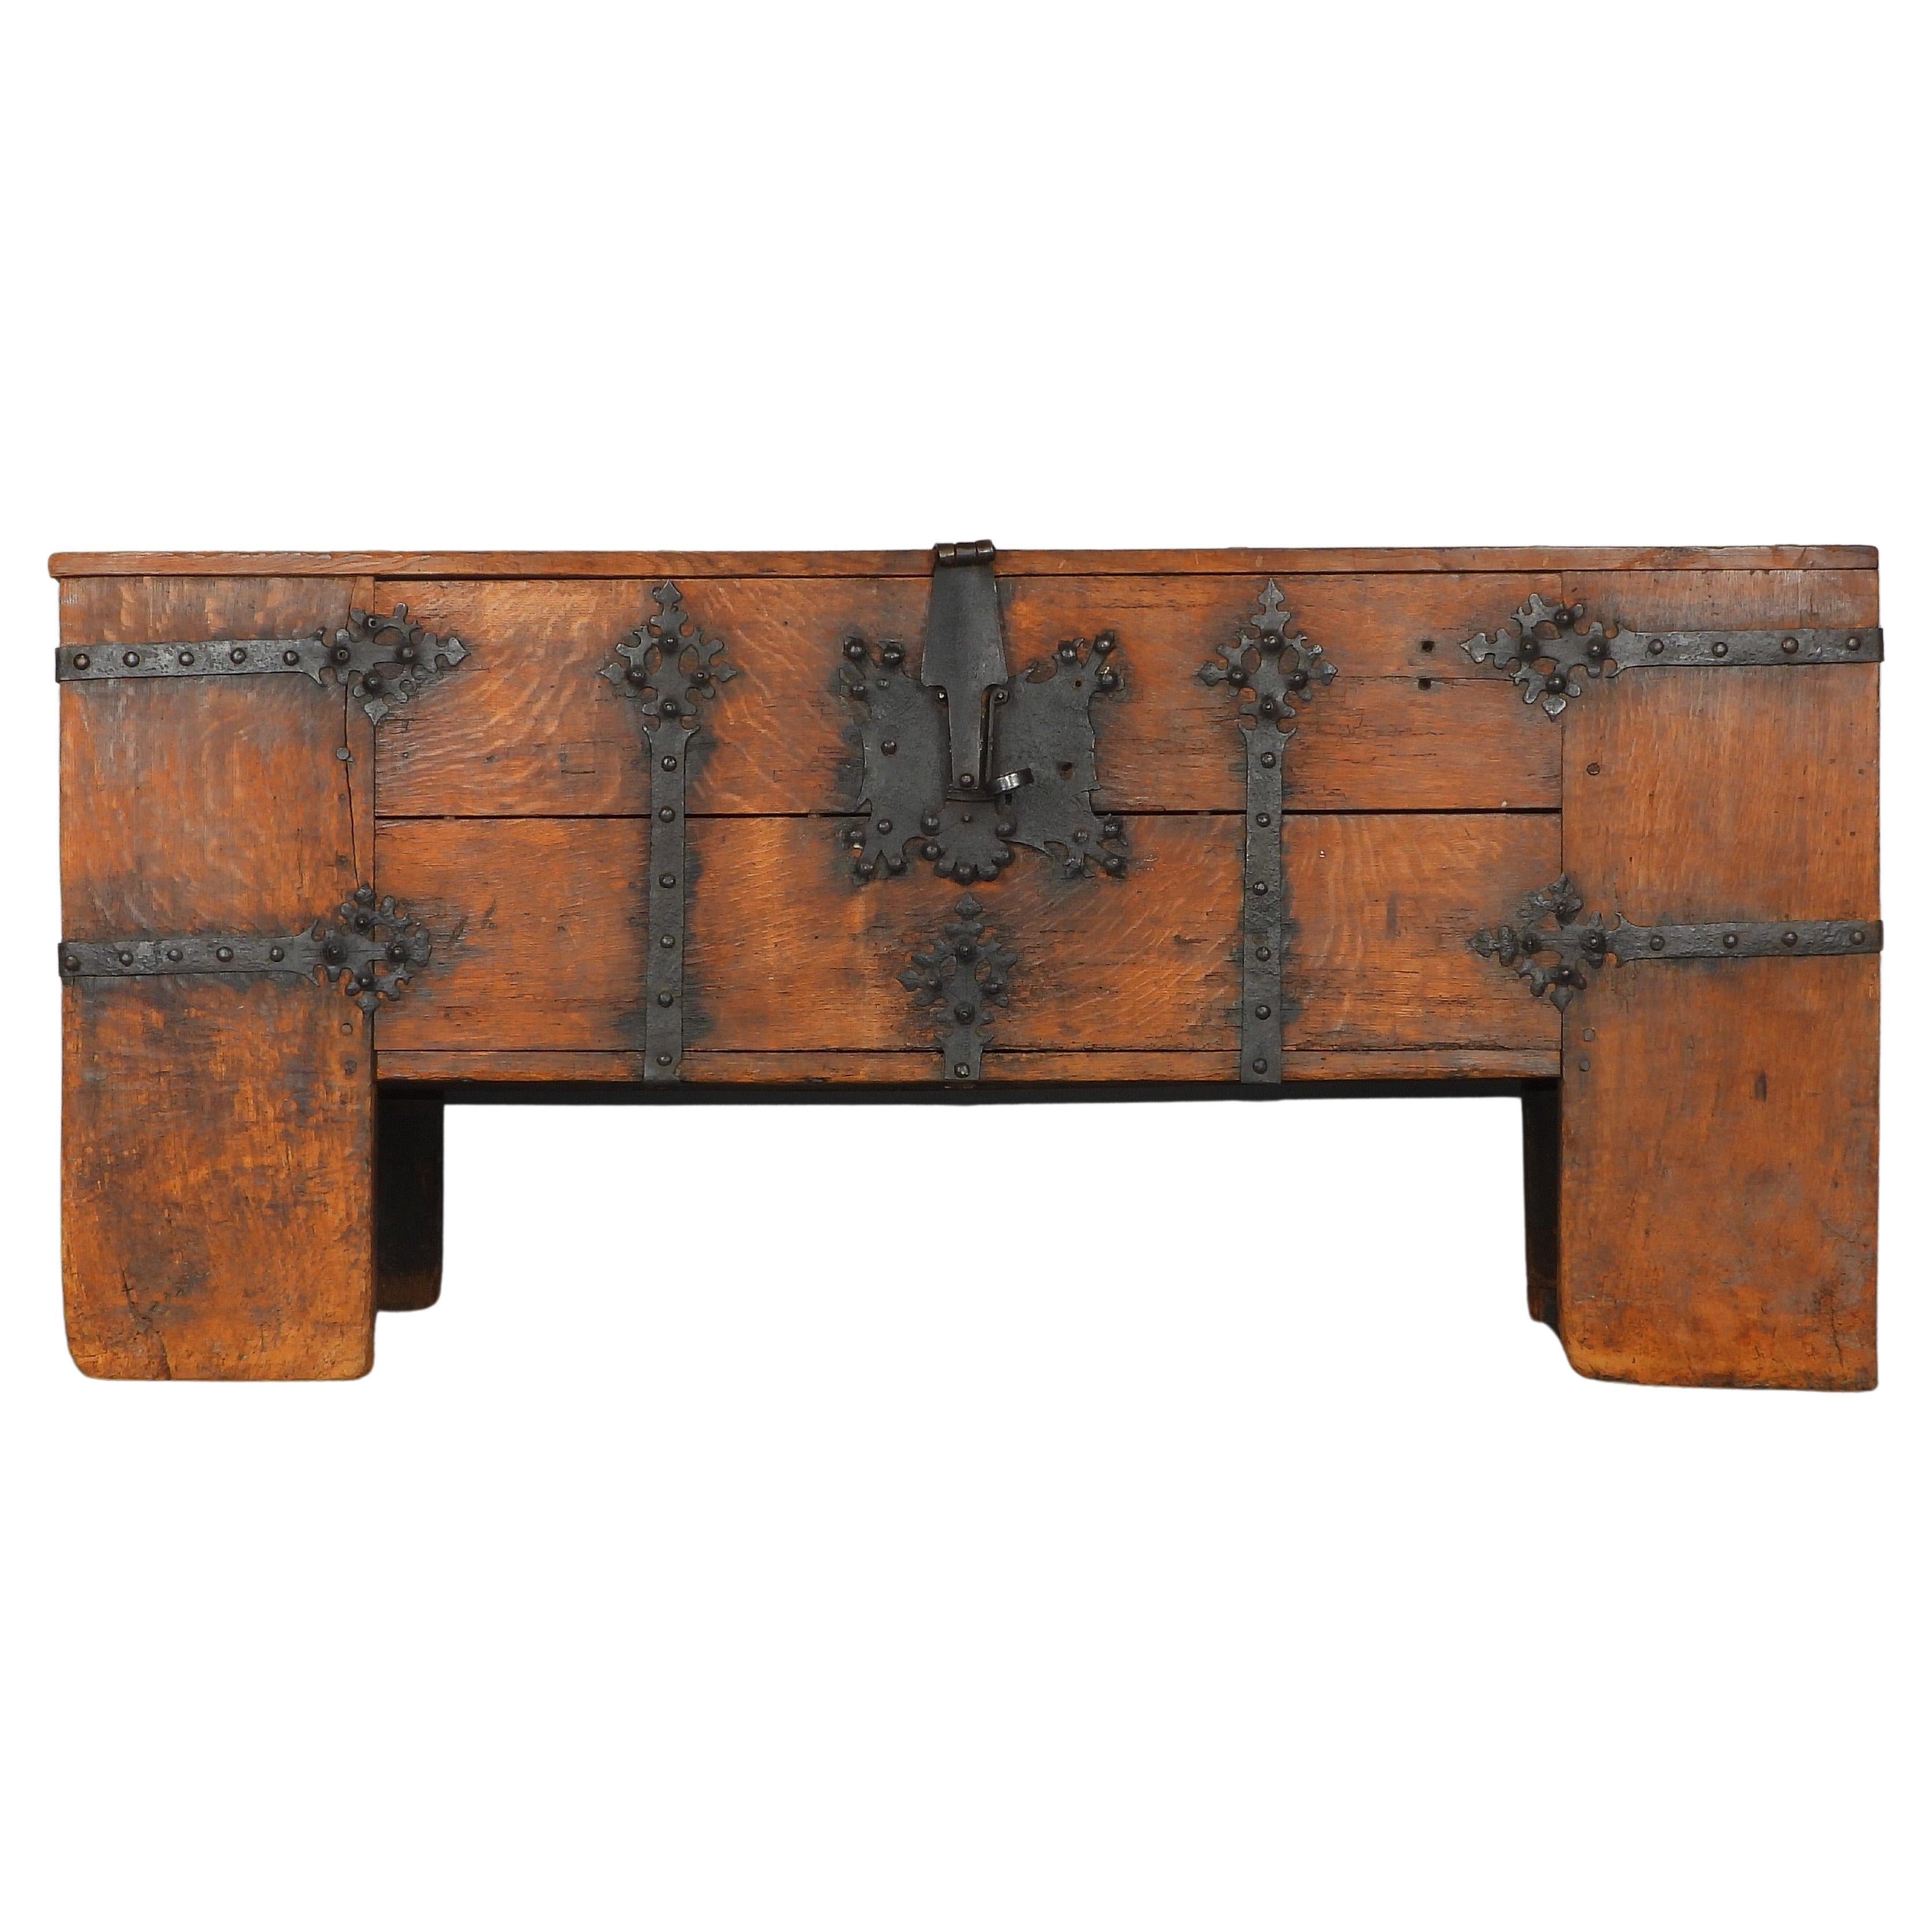 Rare Late Medieval 16th Century German Wrought Iron Oak Chest For Sale